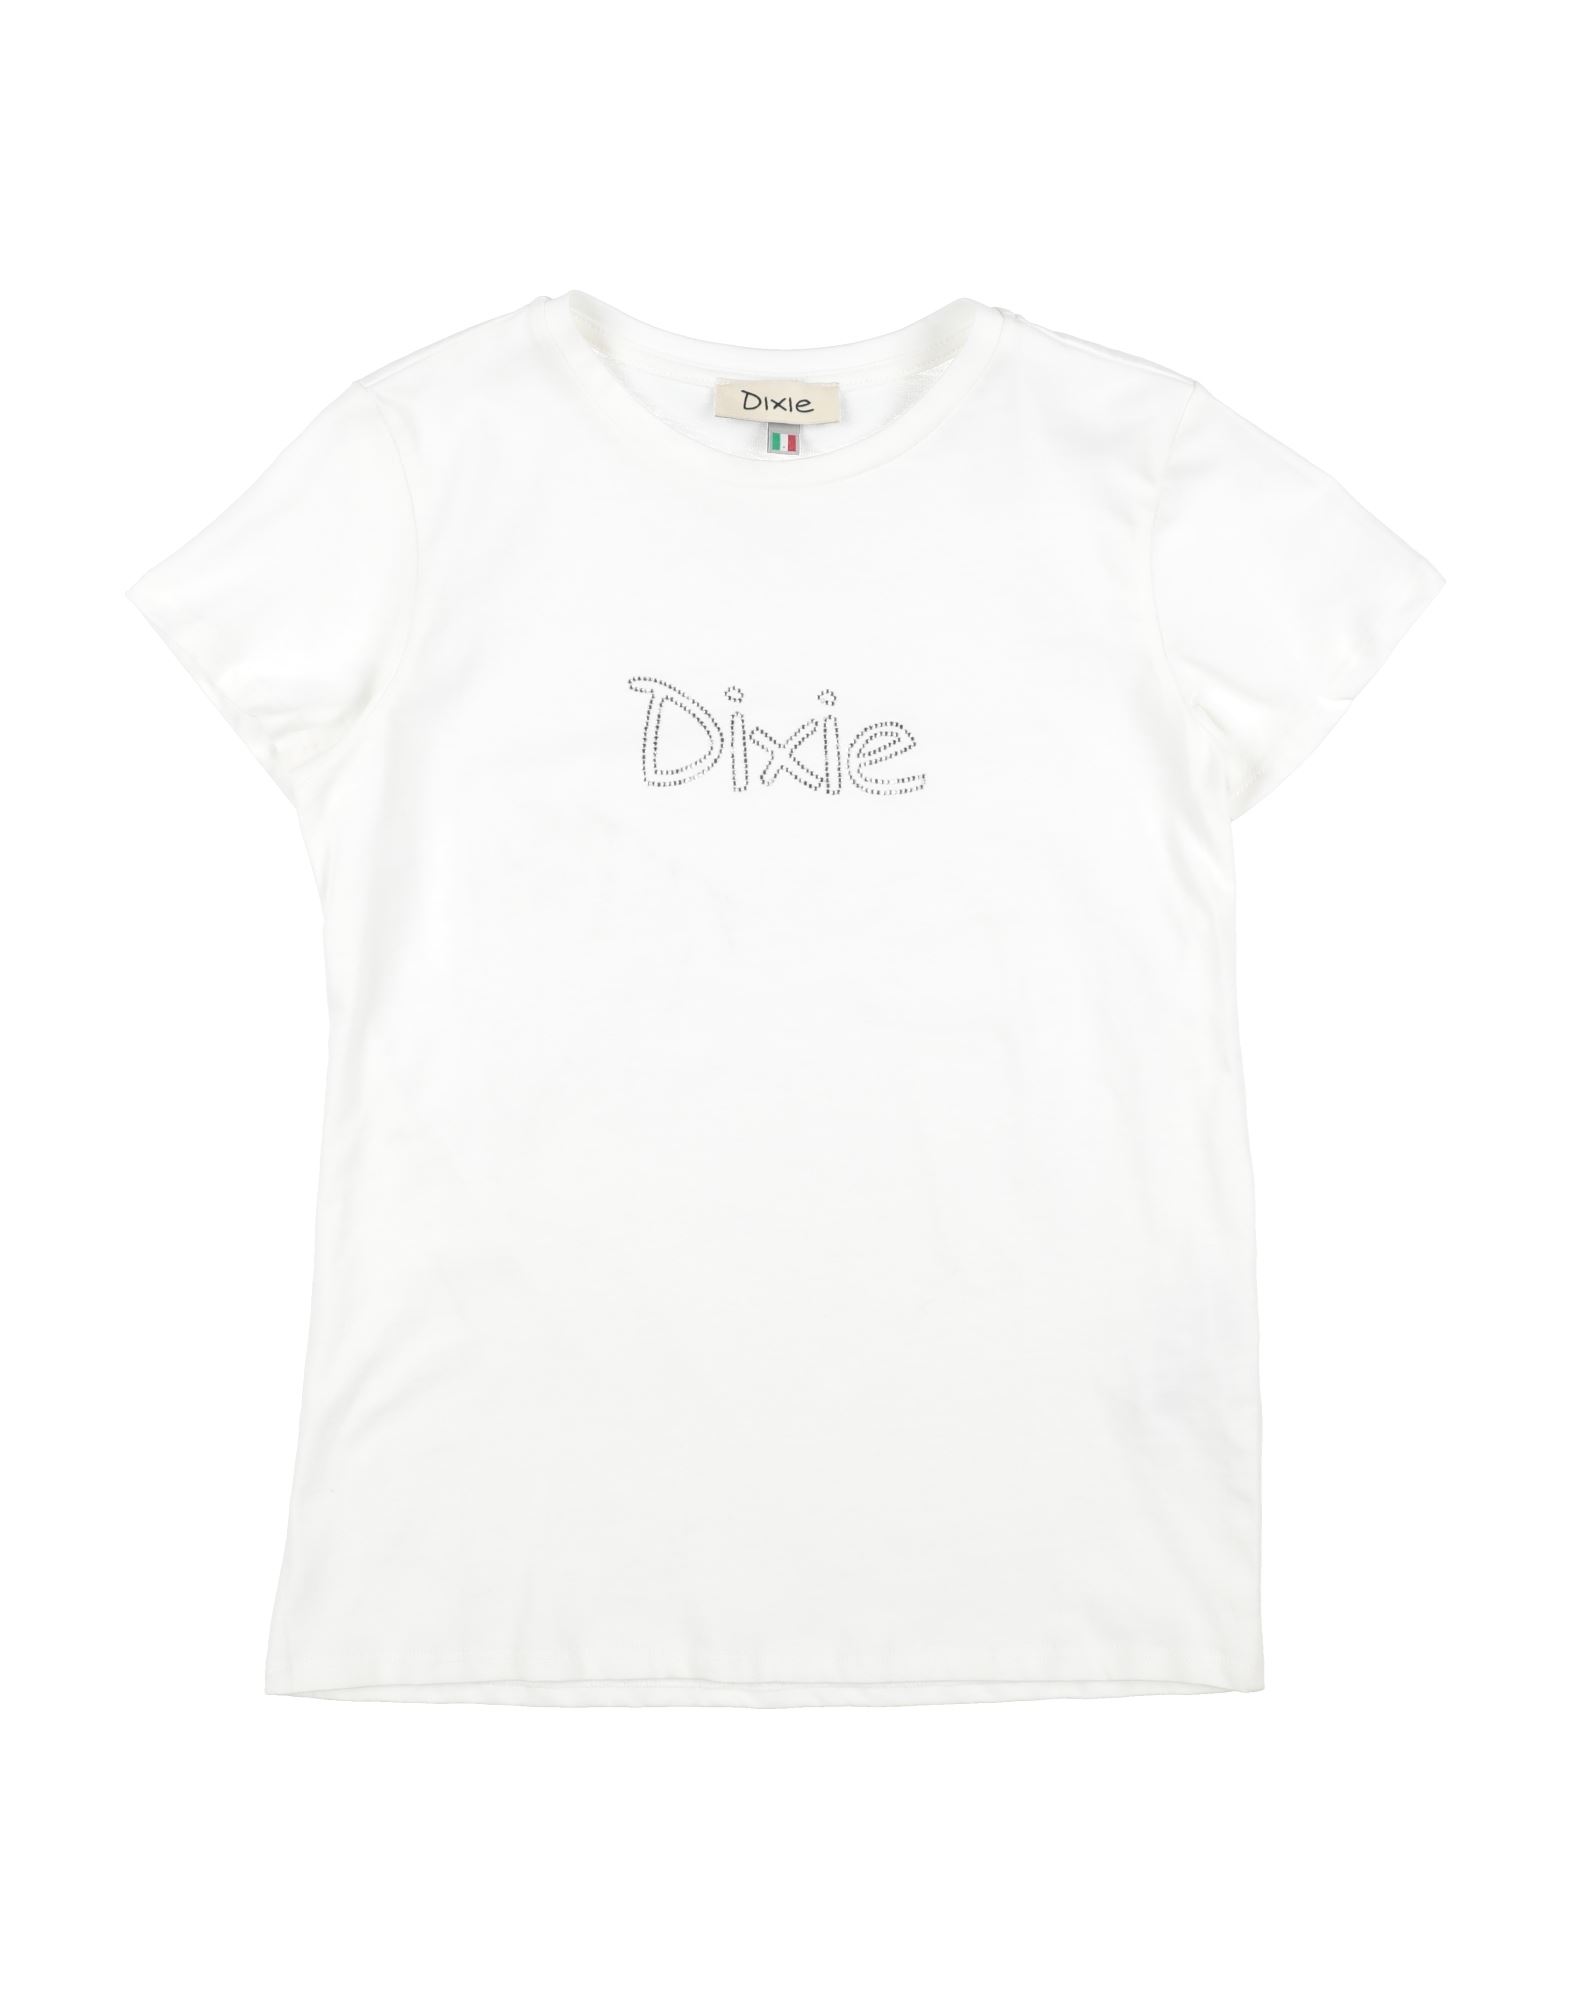 Dixie Kids' T-shirts In White